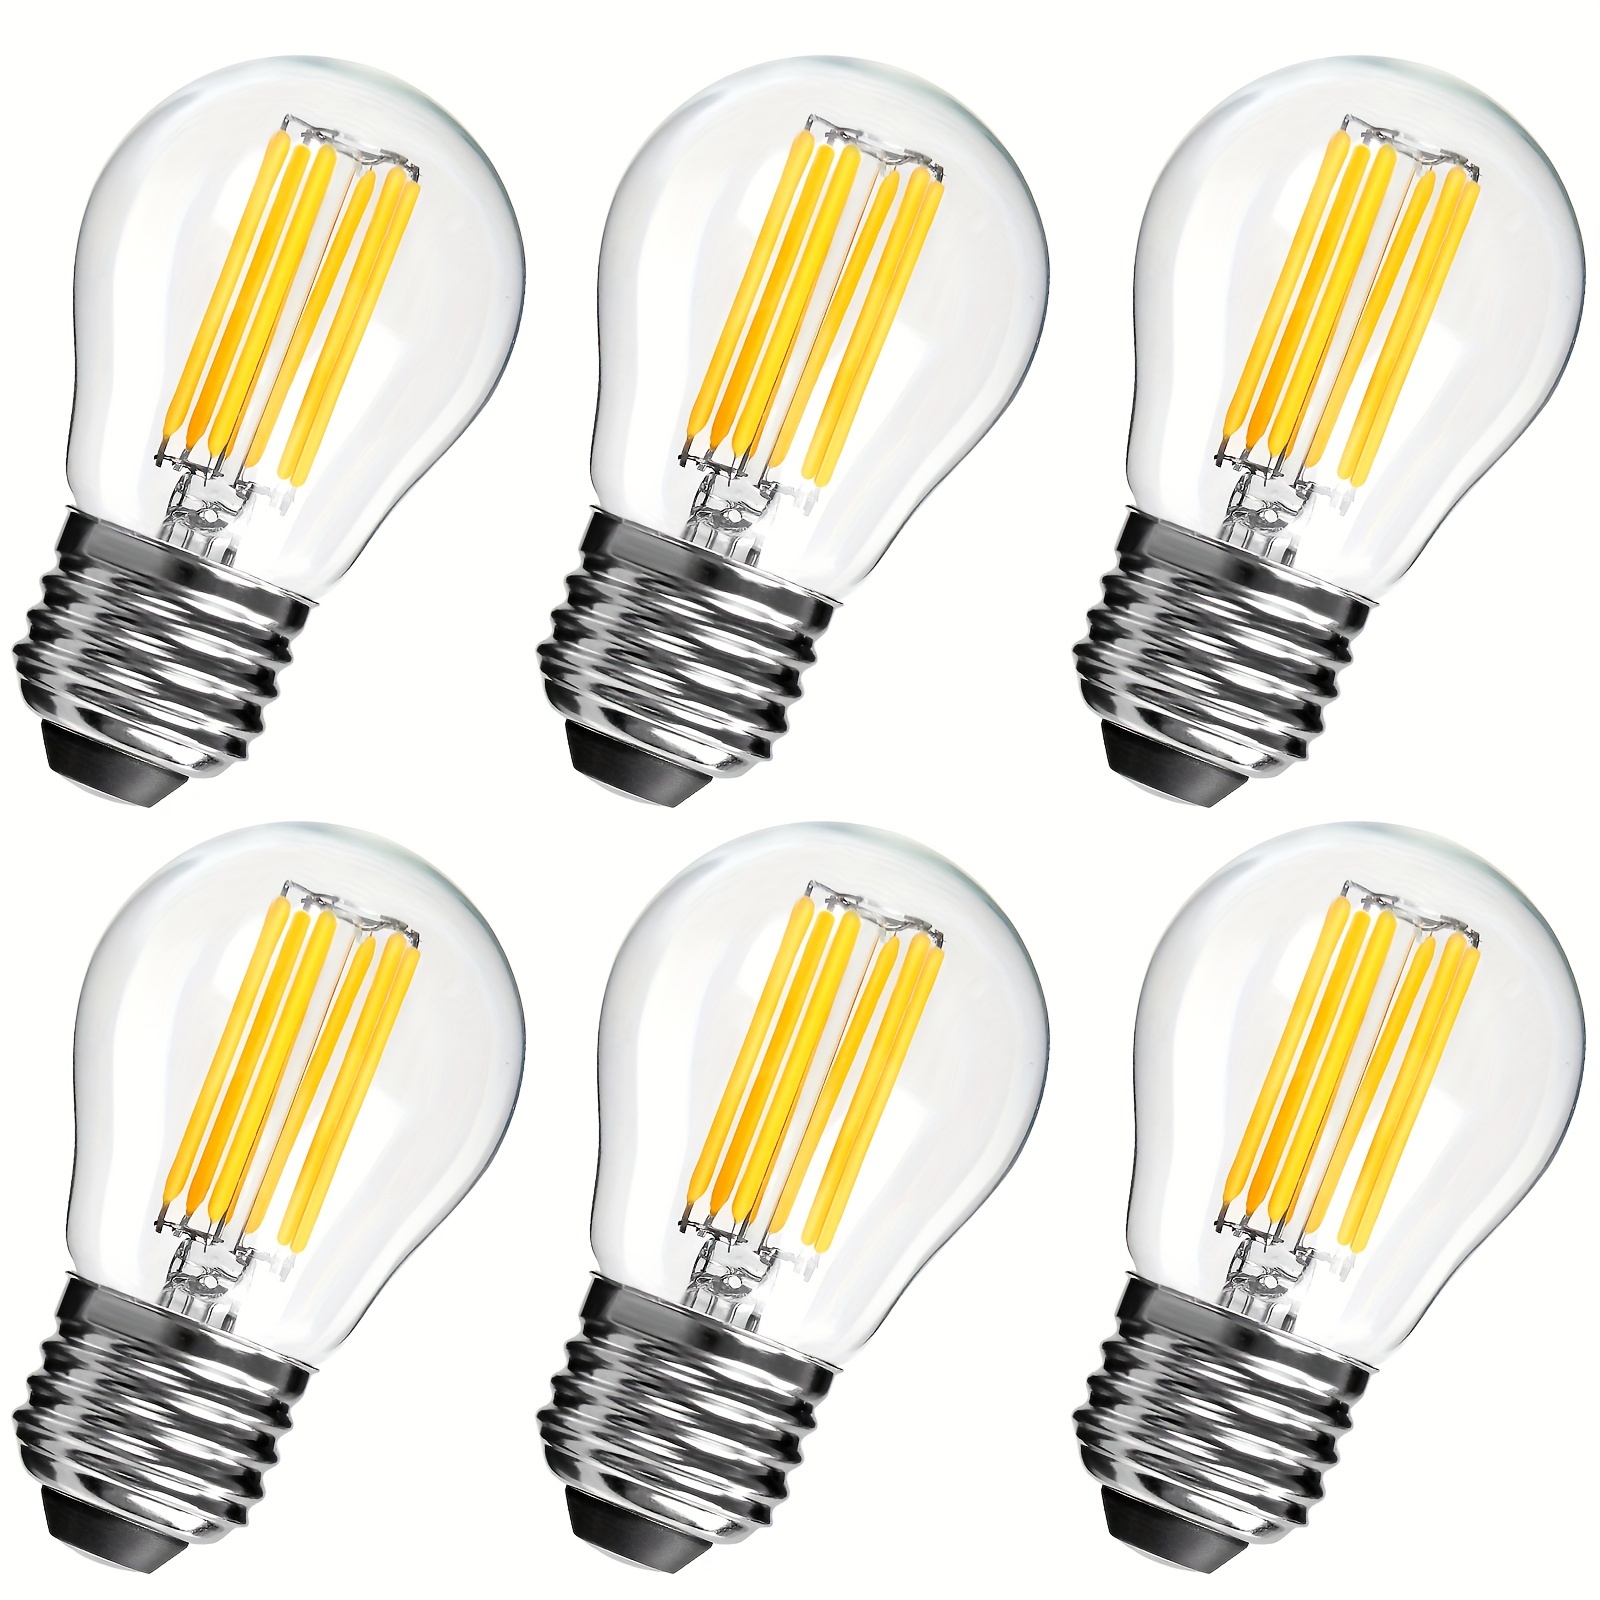 YDJoo E14 G45 LED Edison Bulb 6W LED Filament Light Bulb 60W Equivalent  Warm White 2700K Clear Glass Decorative Vintage Bulb Dimmable for Pendent  Chandelier, AC110V(4 Pack) 